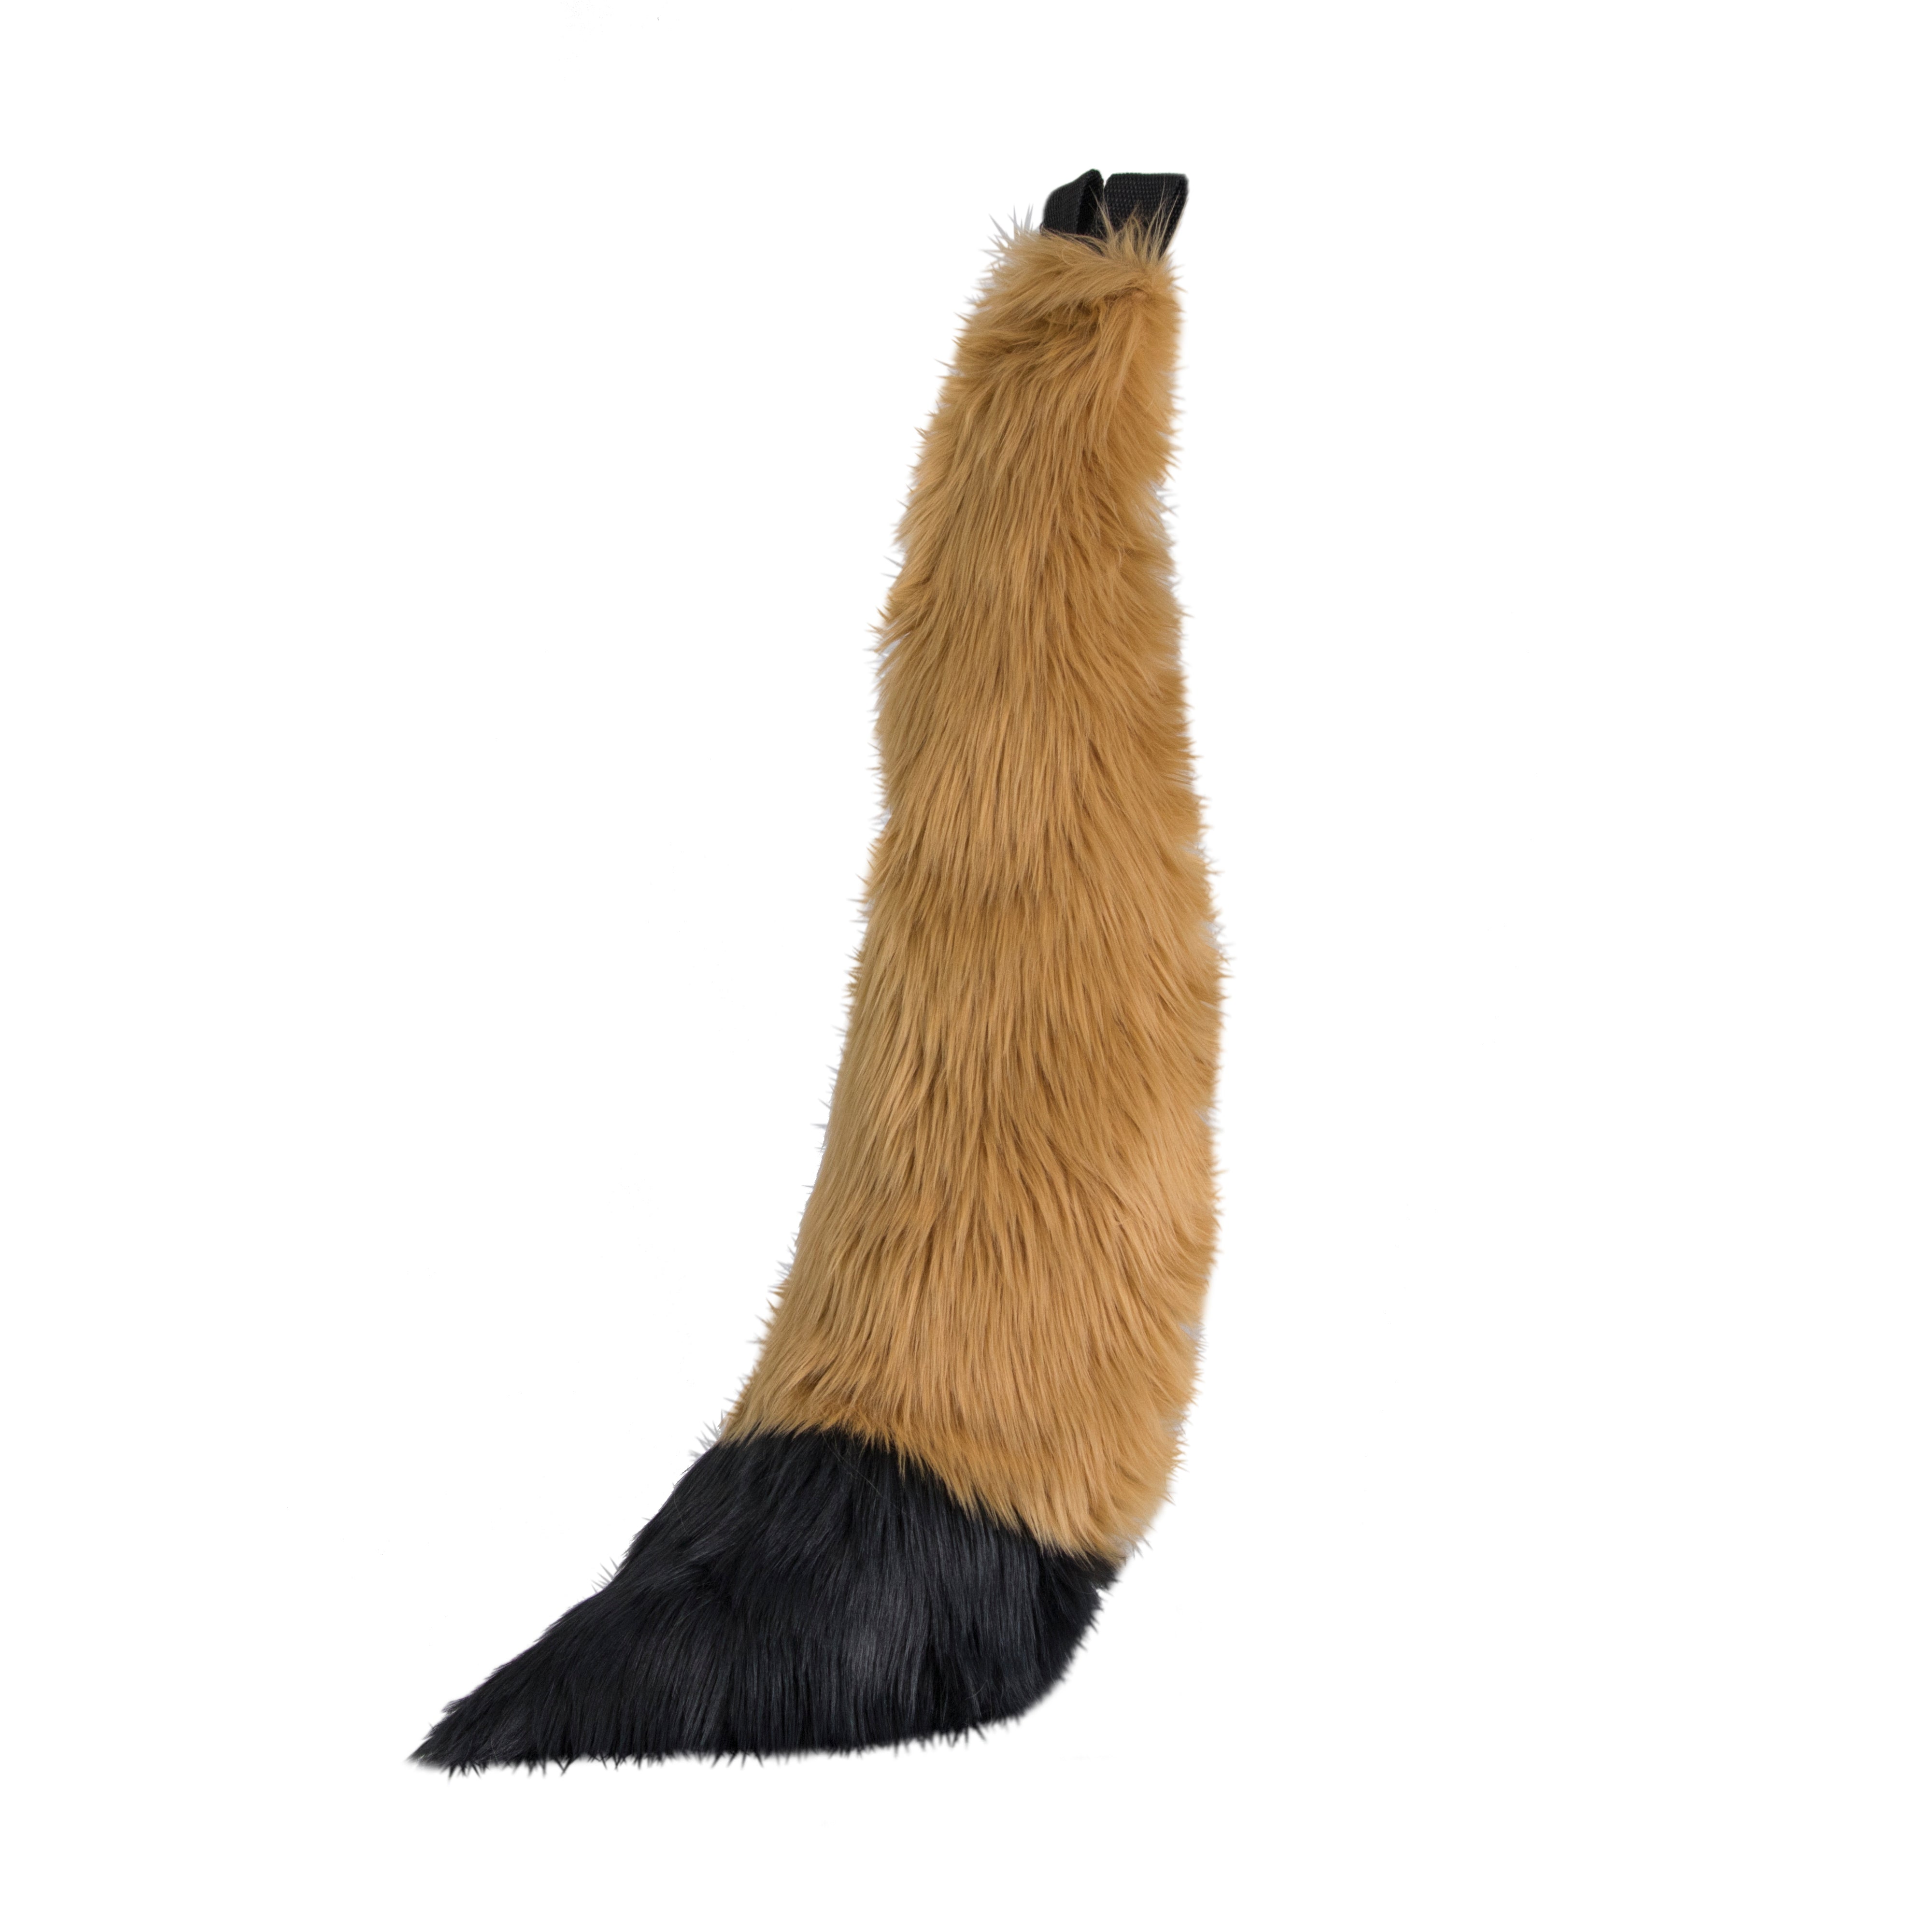 butterscotch brown and black Pawstar furry fox tail made from vegan friendly faux fur. Great for halloween, cosplay and partial fursuits.